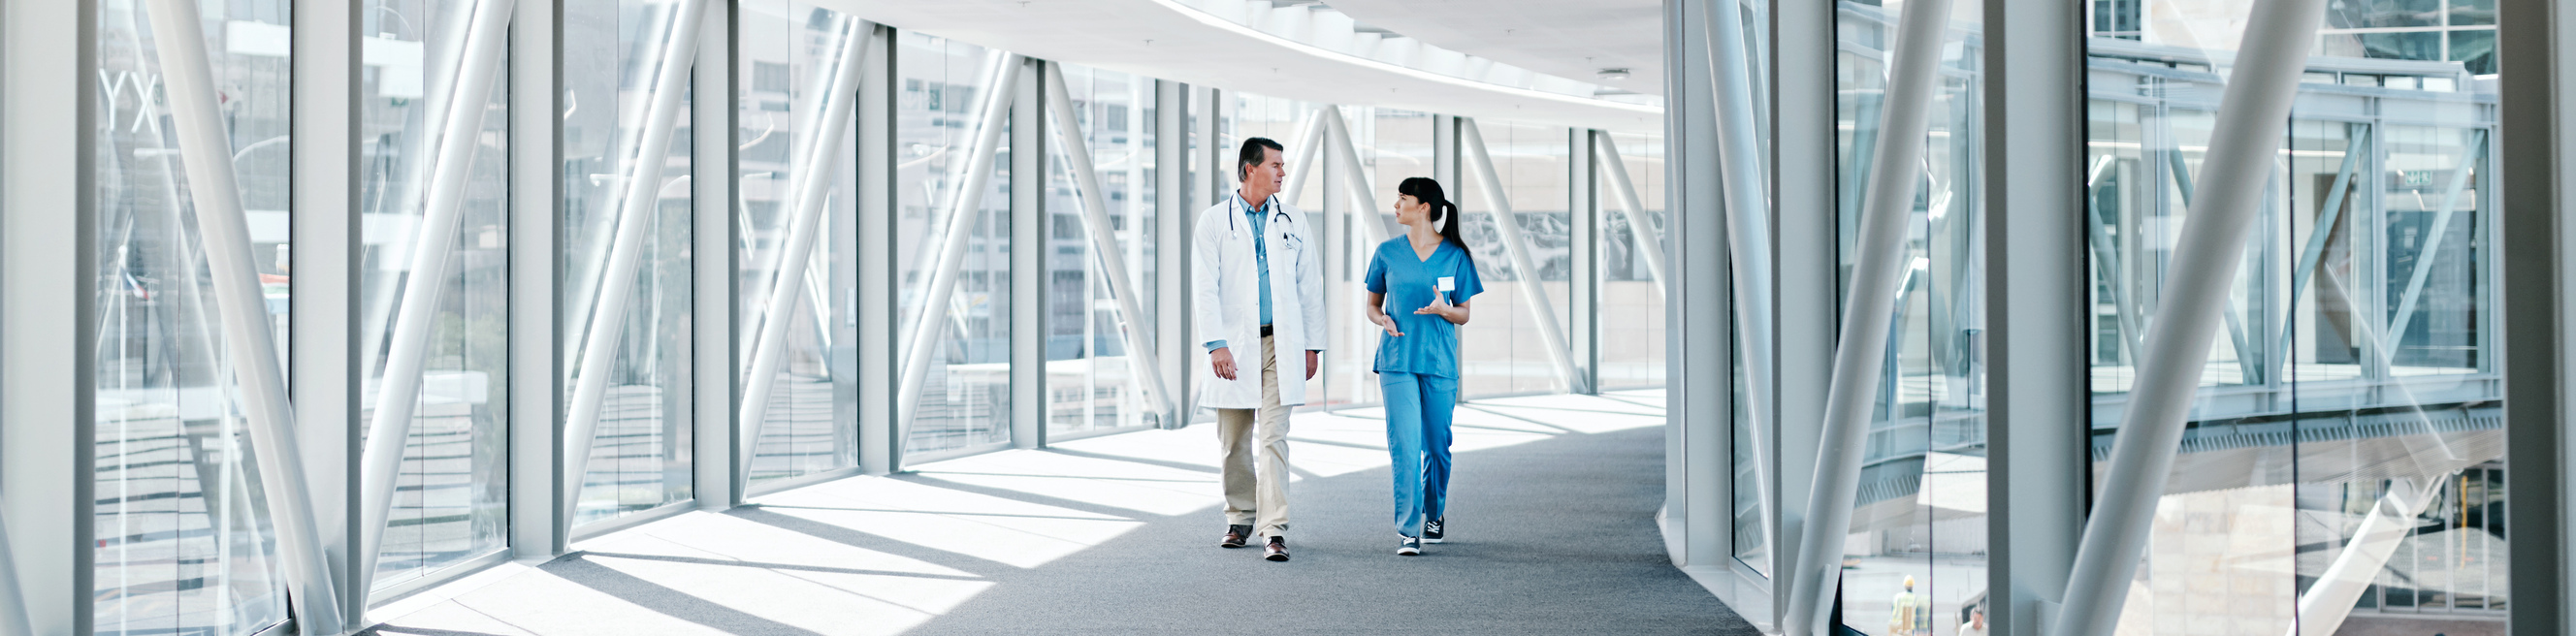 Shot of two healthcare workers walking together